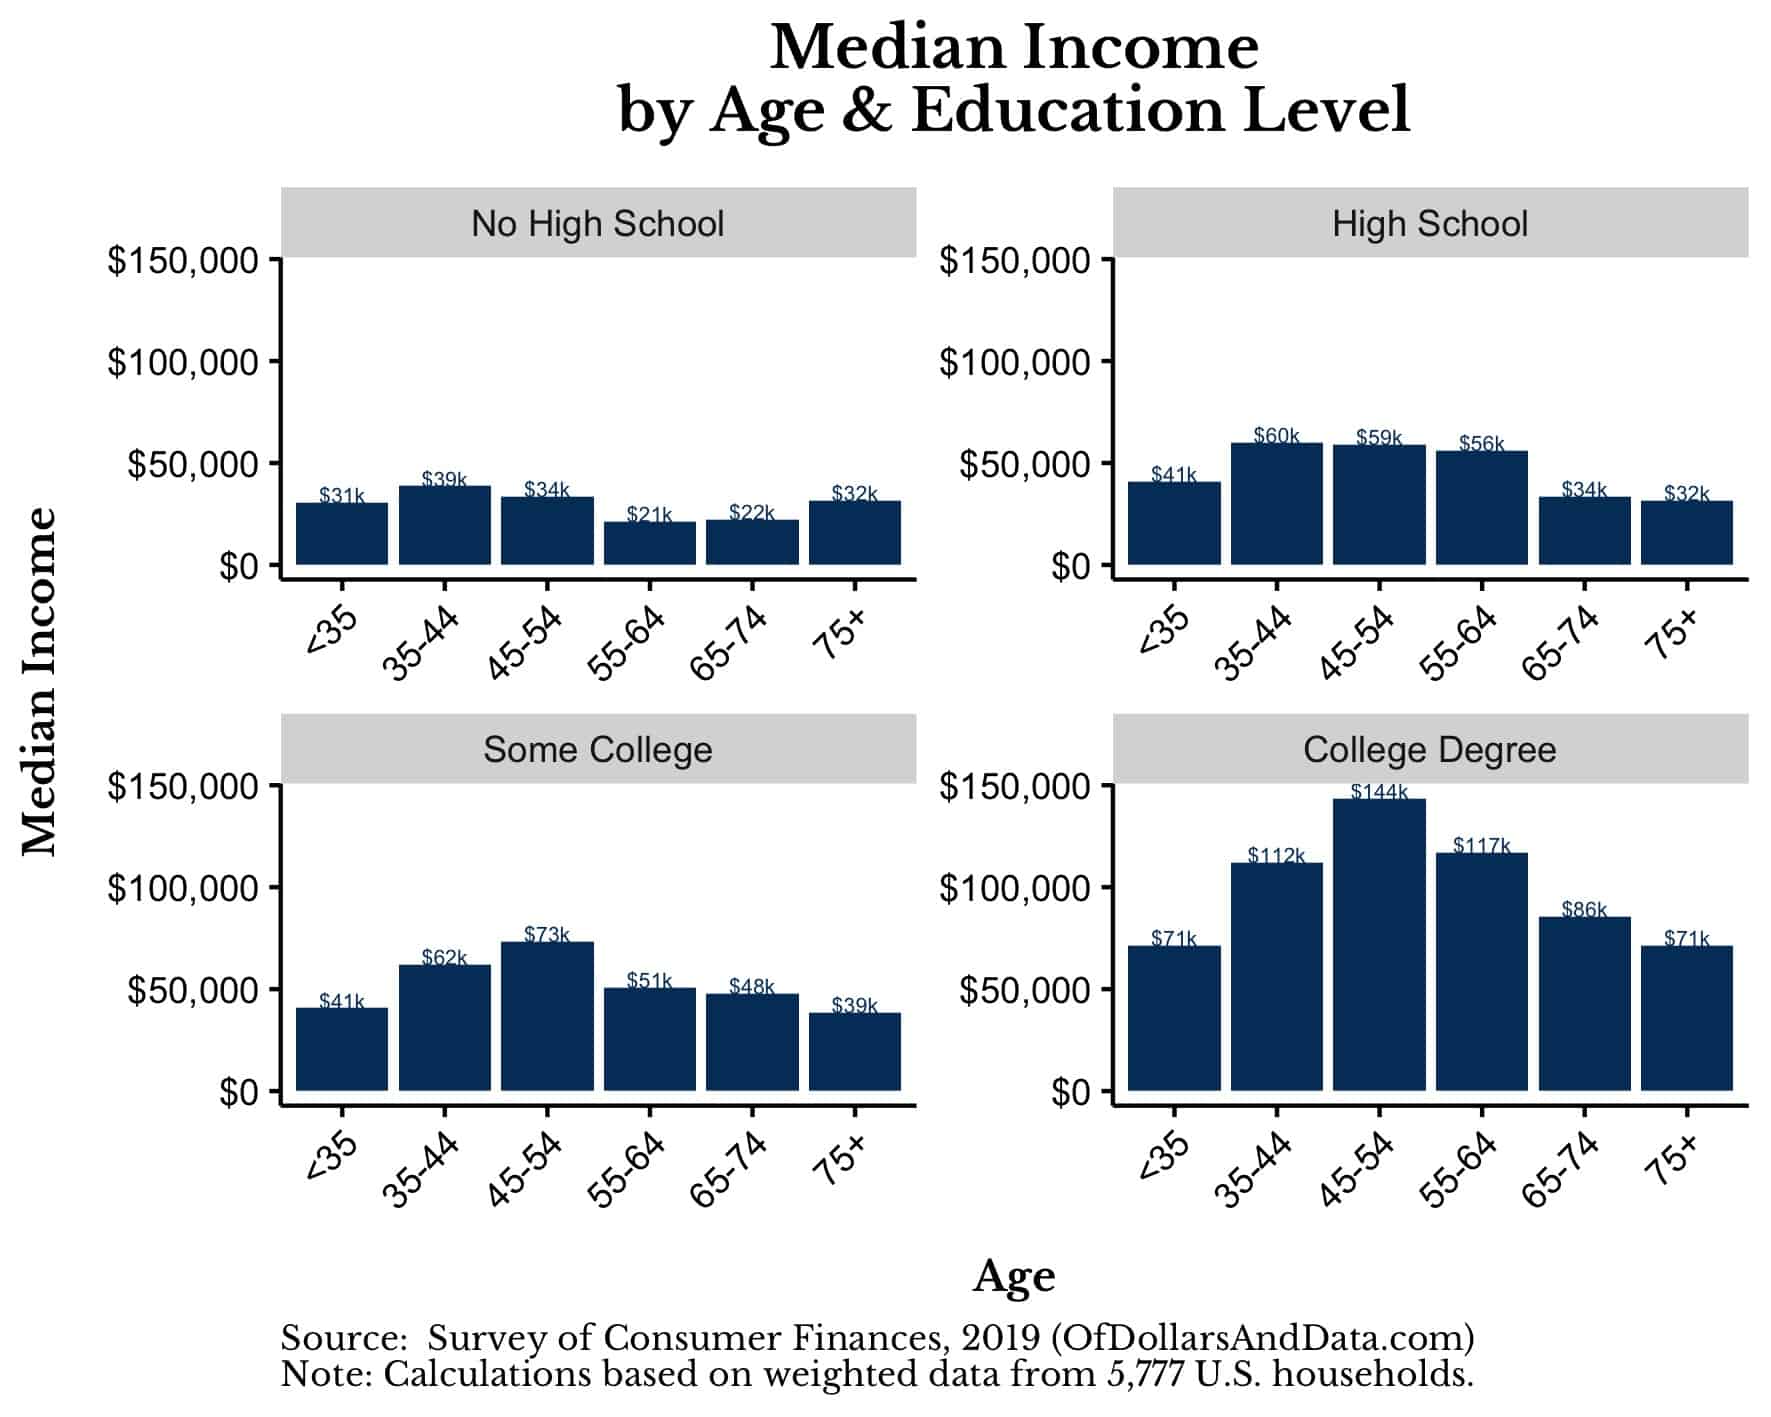 Median household income by age and education level in the U.S. from the 2019 Survey of Consumer Finances.